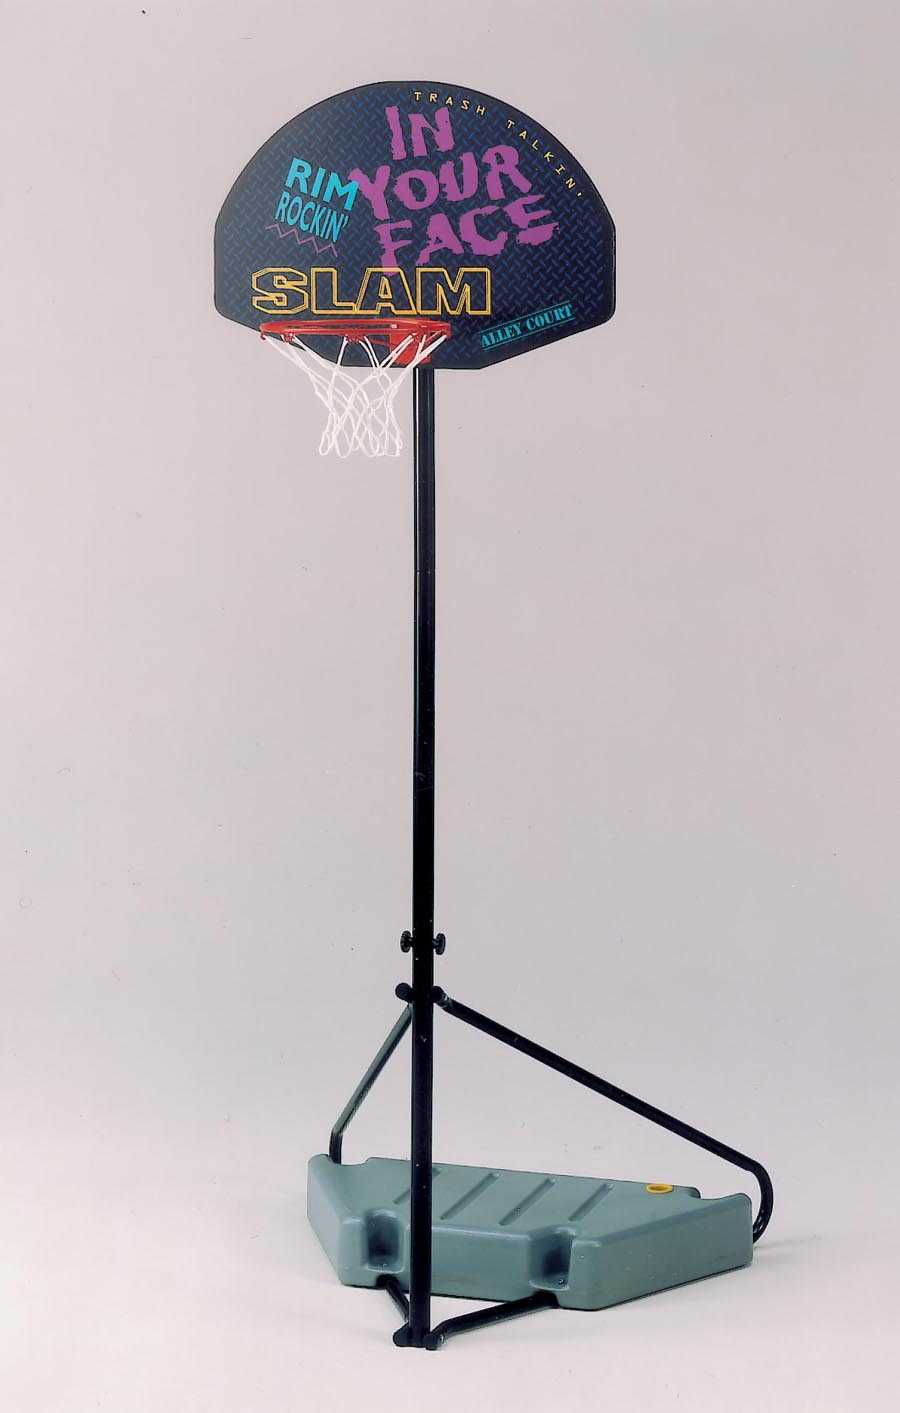 Picture of Recalled Escalade Basketball Hoop